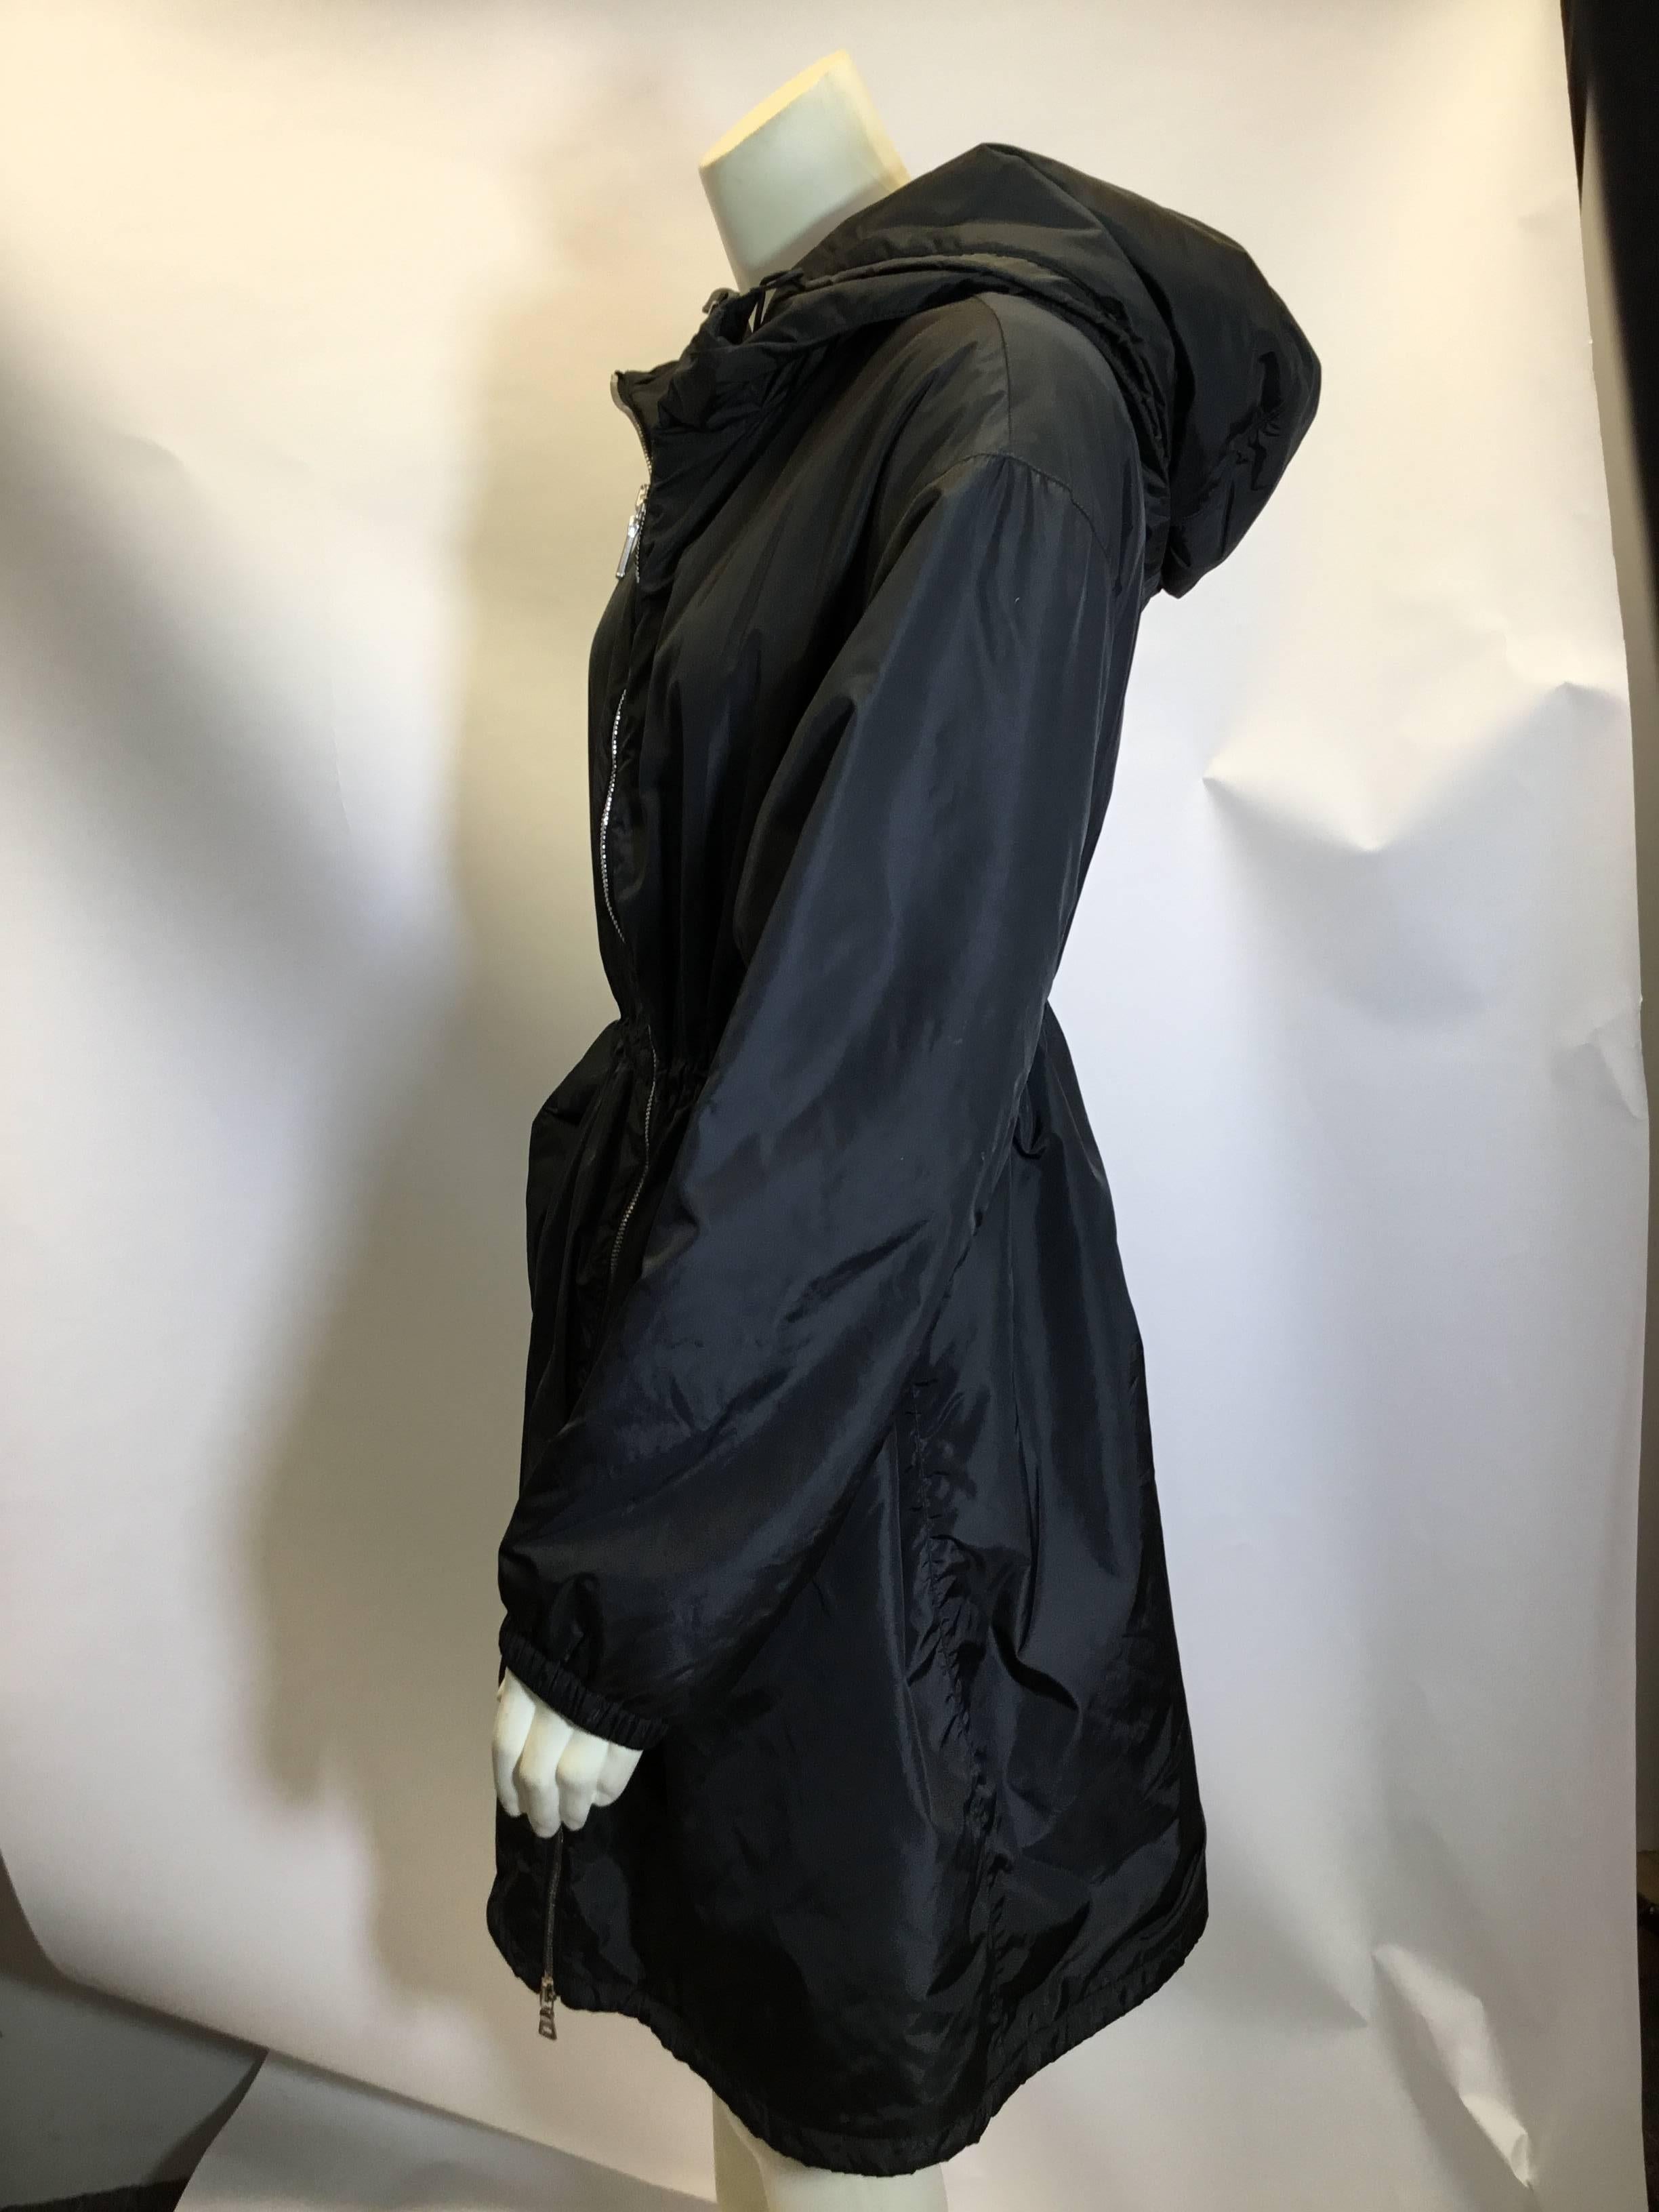 Prada Black Cinched Hooded Coat
$399
Made in China
Zip up style with cinched waist option


